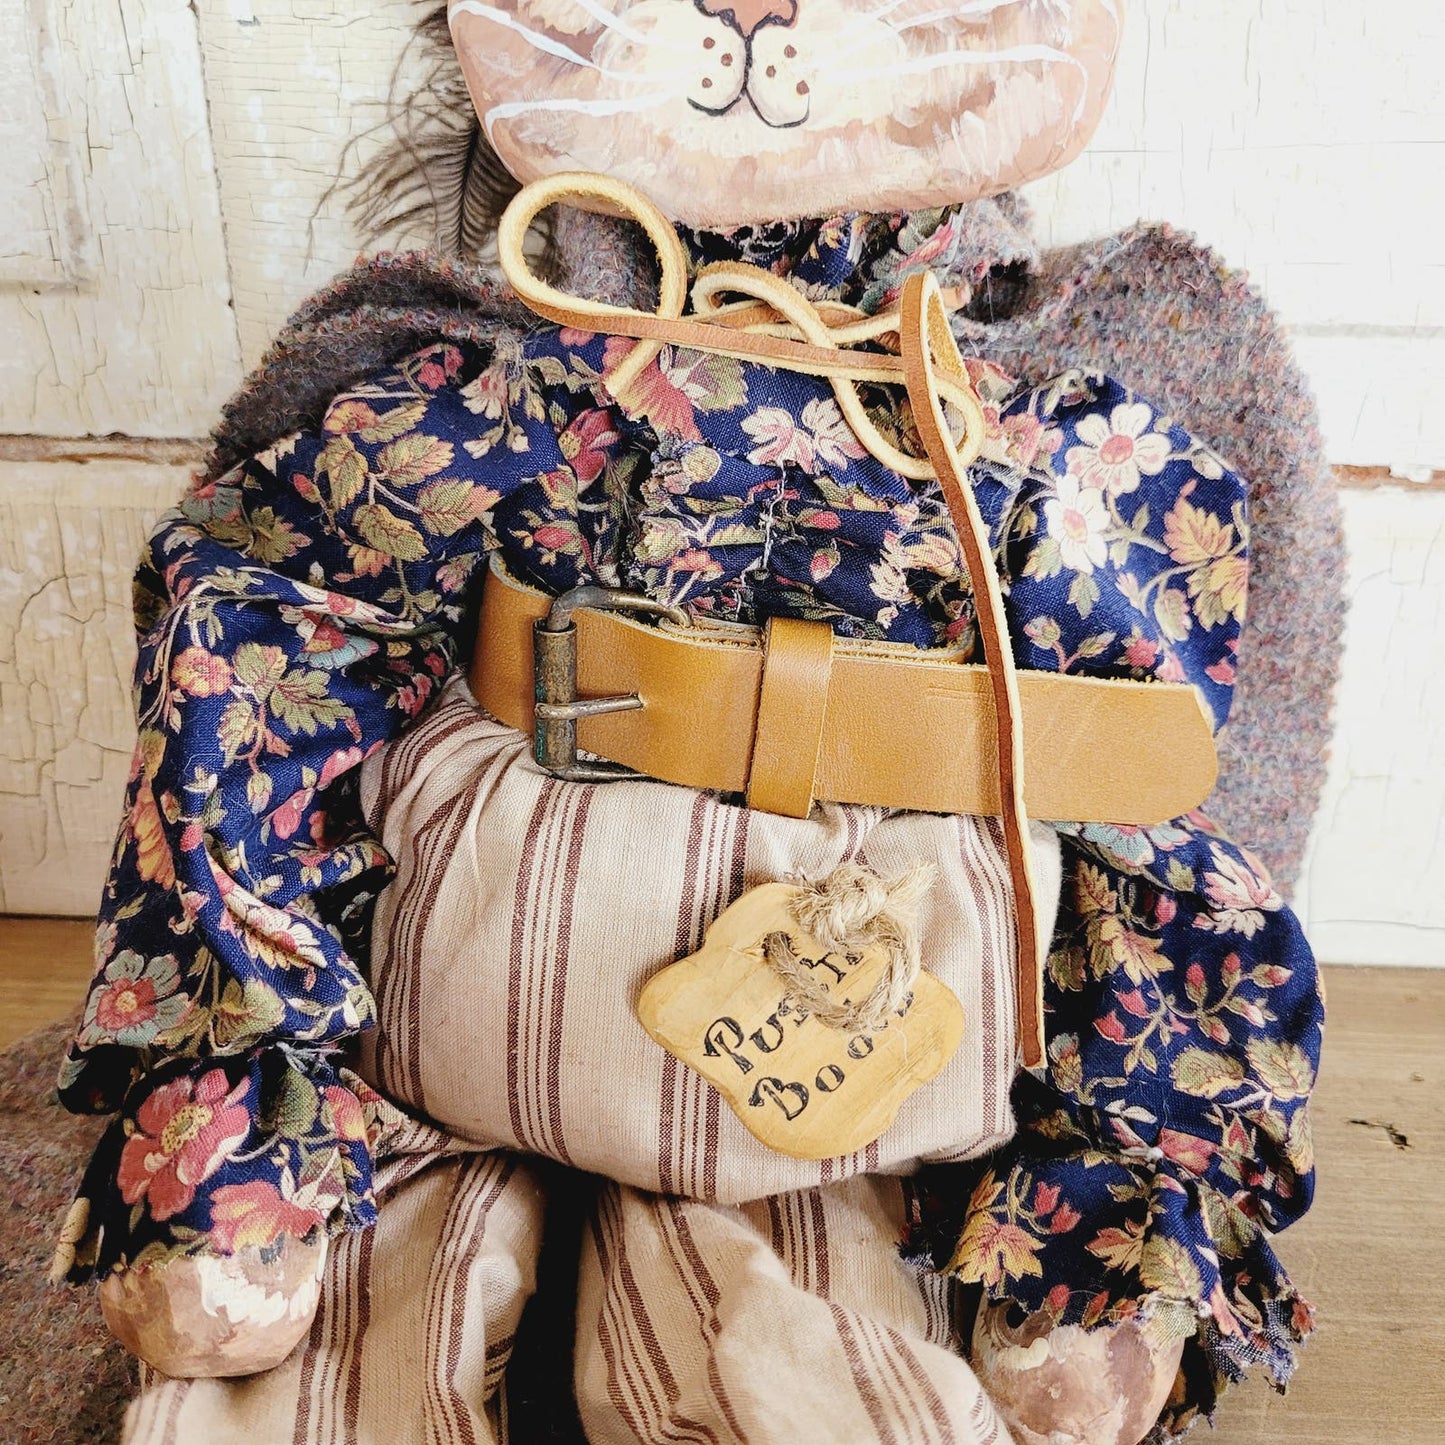 Handmade Hand-Painted Puss 'n Boots Doll - 22" Tall - Vintage Collectible